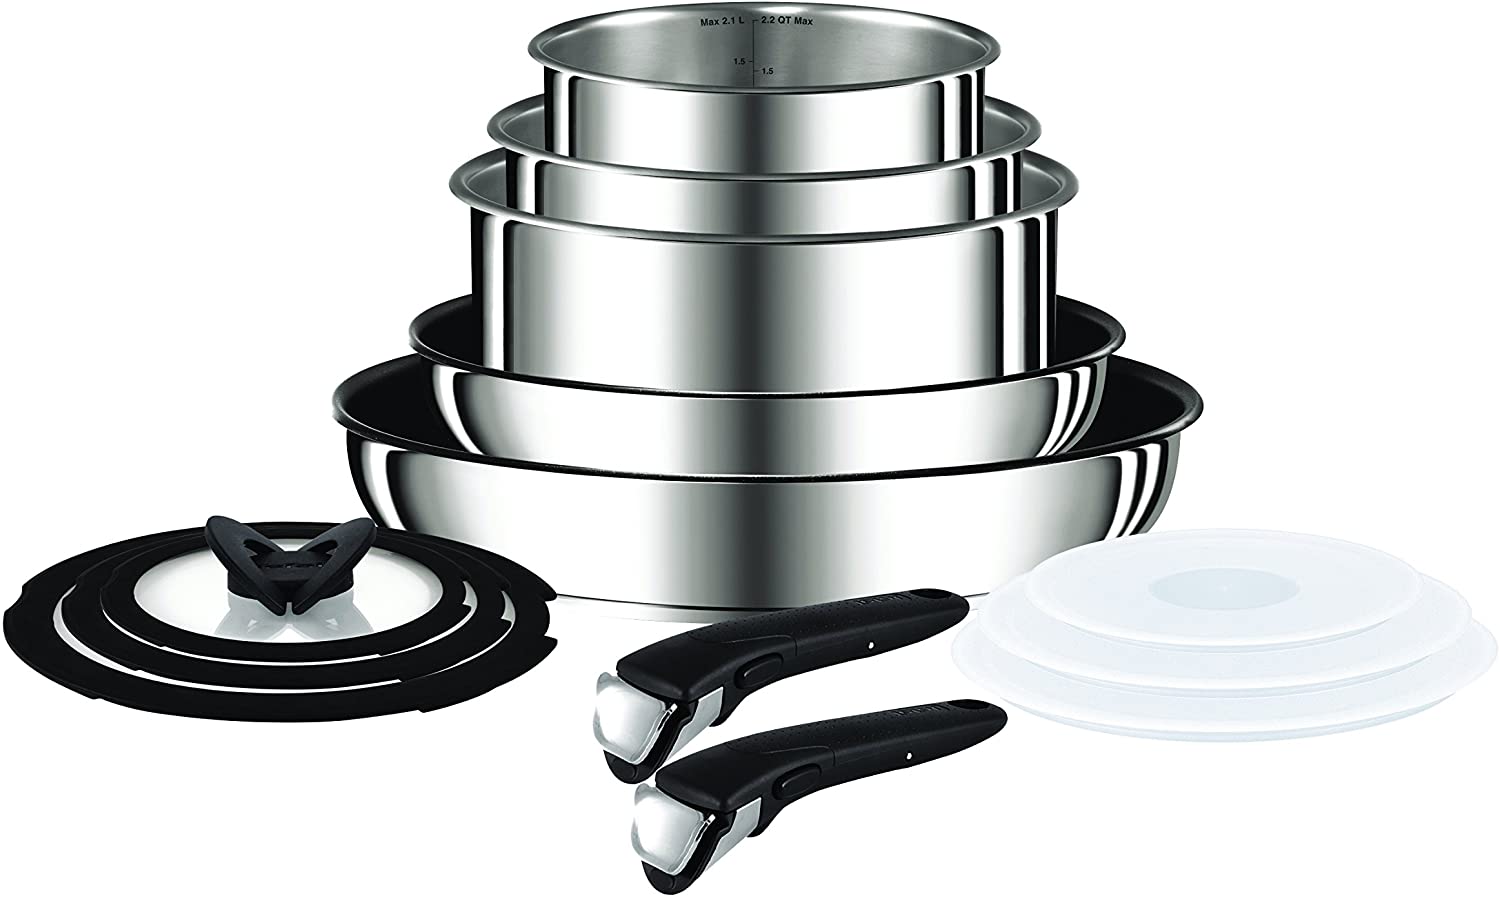 Tefal Ingenio Pots and Pans Set, Stainless Steel, 13-Piece, Induction -  Meat Smoke Fire